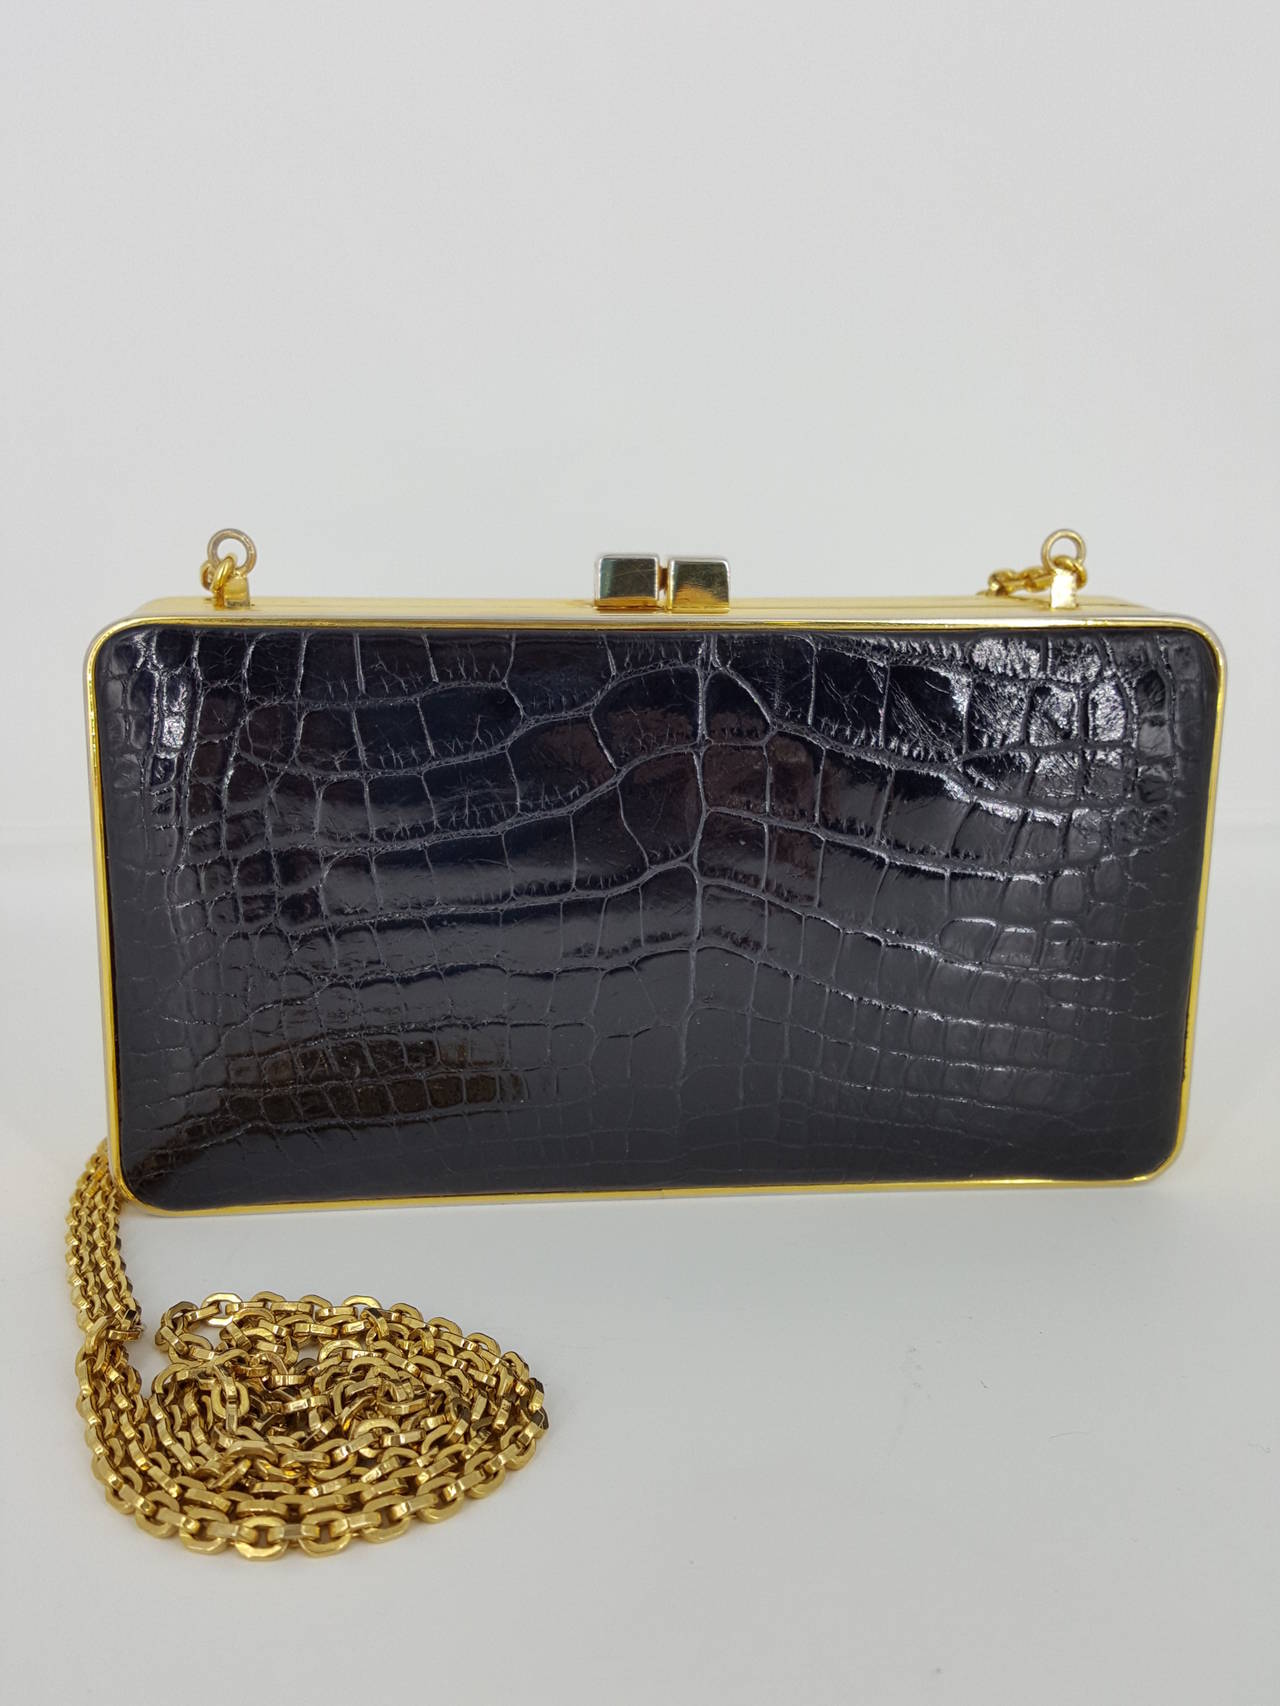 Offered for sale is this lovely Judith Leiber Baby Alligator evening bag/clutch with gold hardware and 25